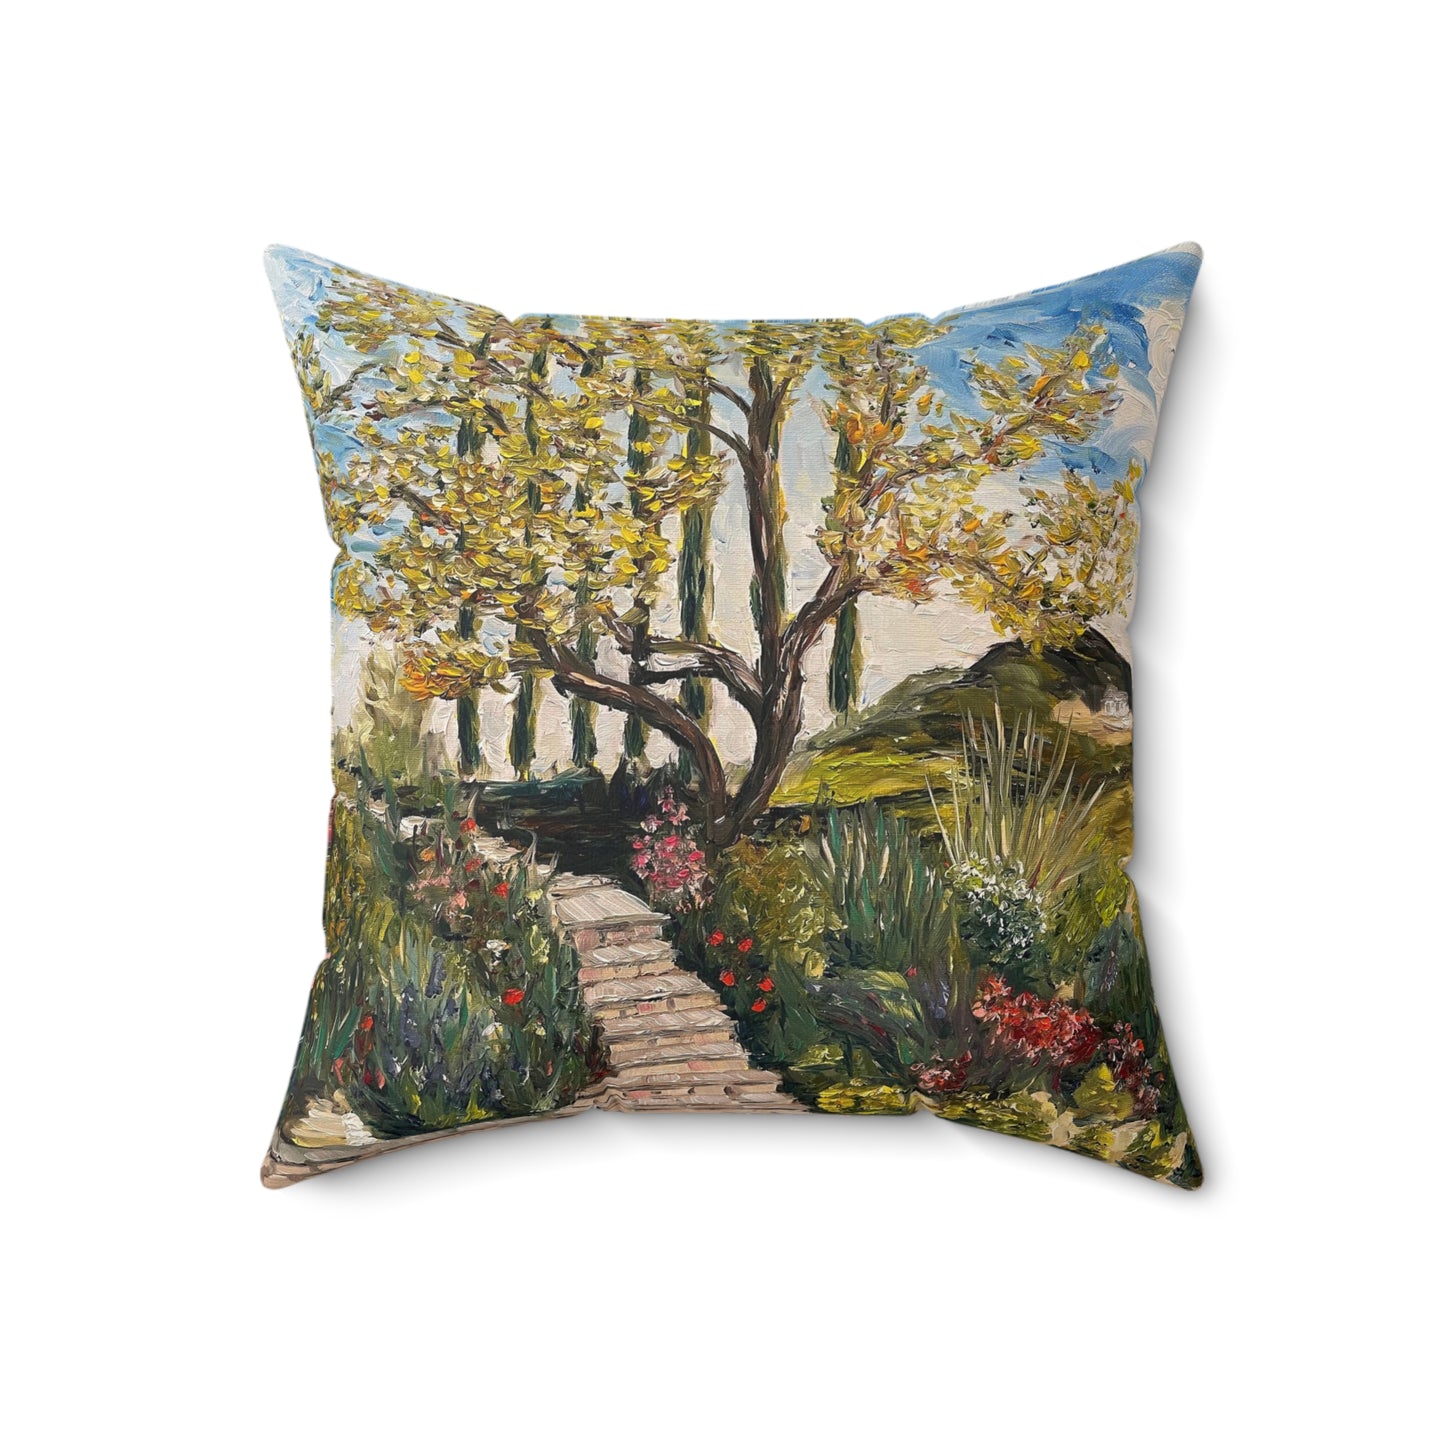 Tree and Garden at GBV Indoor Spun Polyester Square Pillow